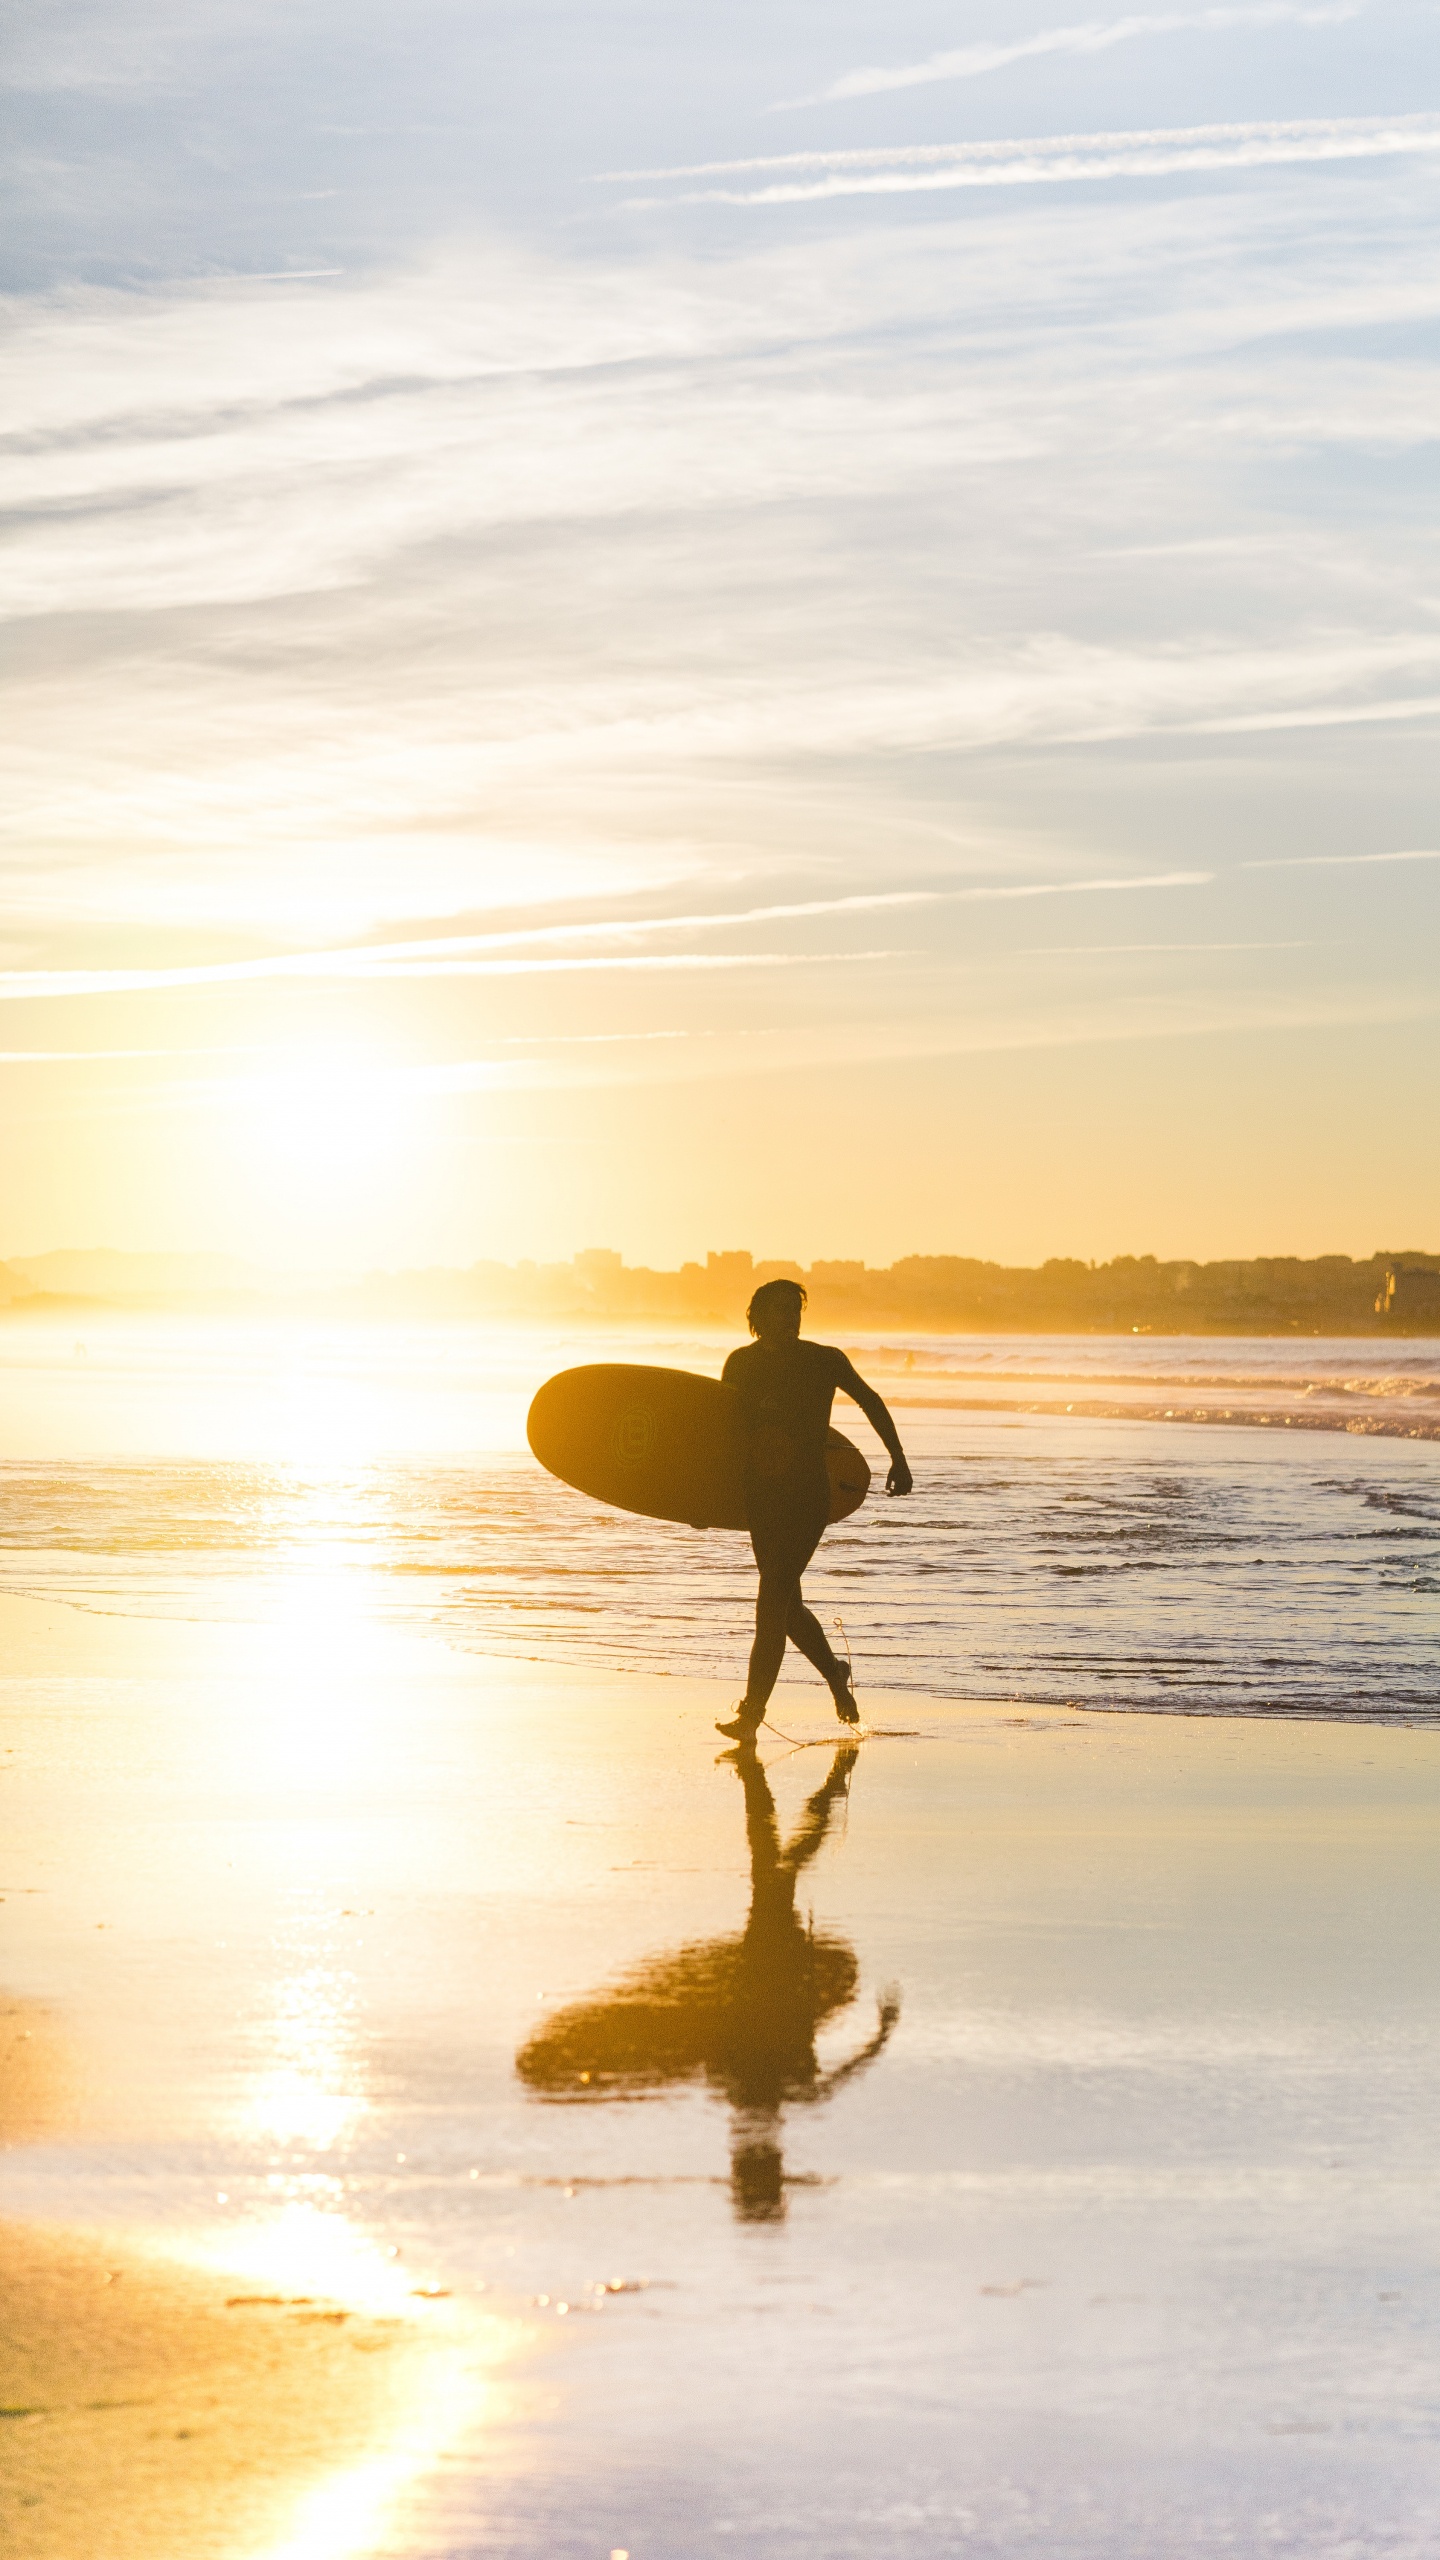 Man in Black Shorts Holding Surfboard Walking on Seashore During Sunset. Wallpaper in 1440x2560 Resolution